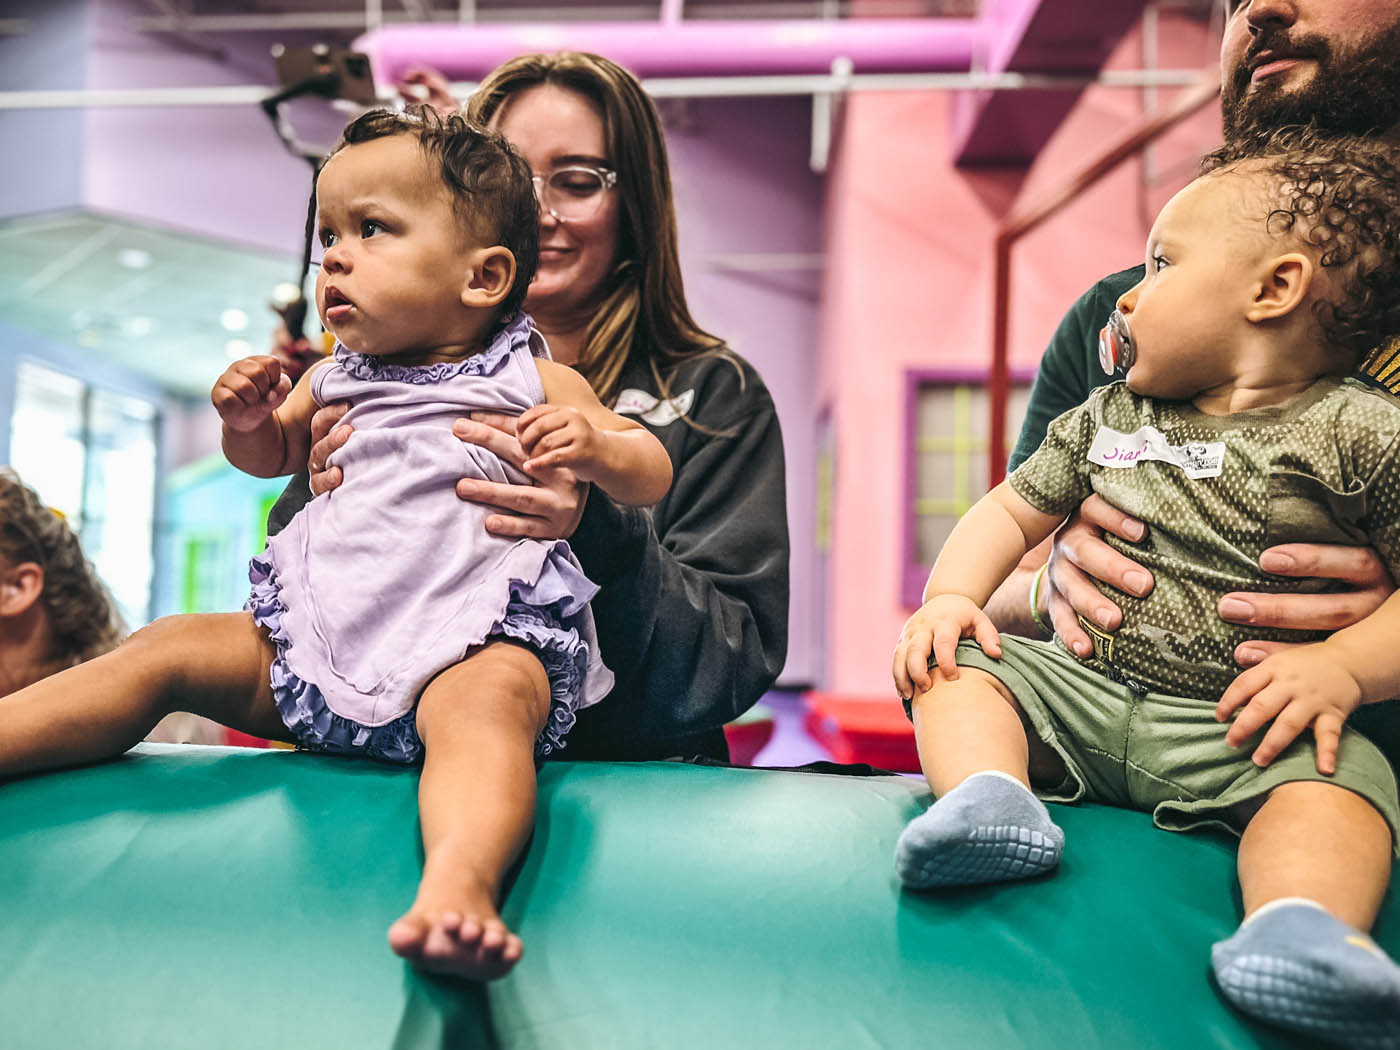 Adults with babies in Romp n' Roll's baby activities in Raleigh, NC.